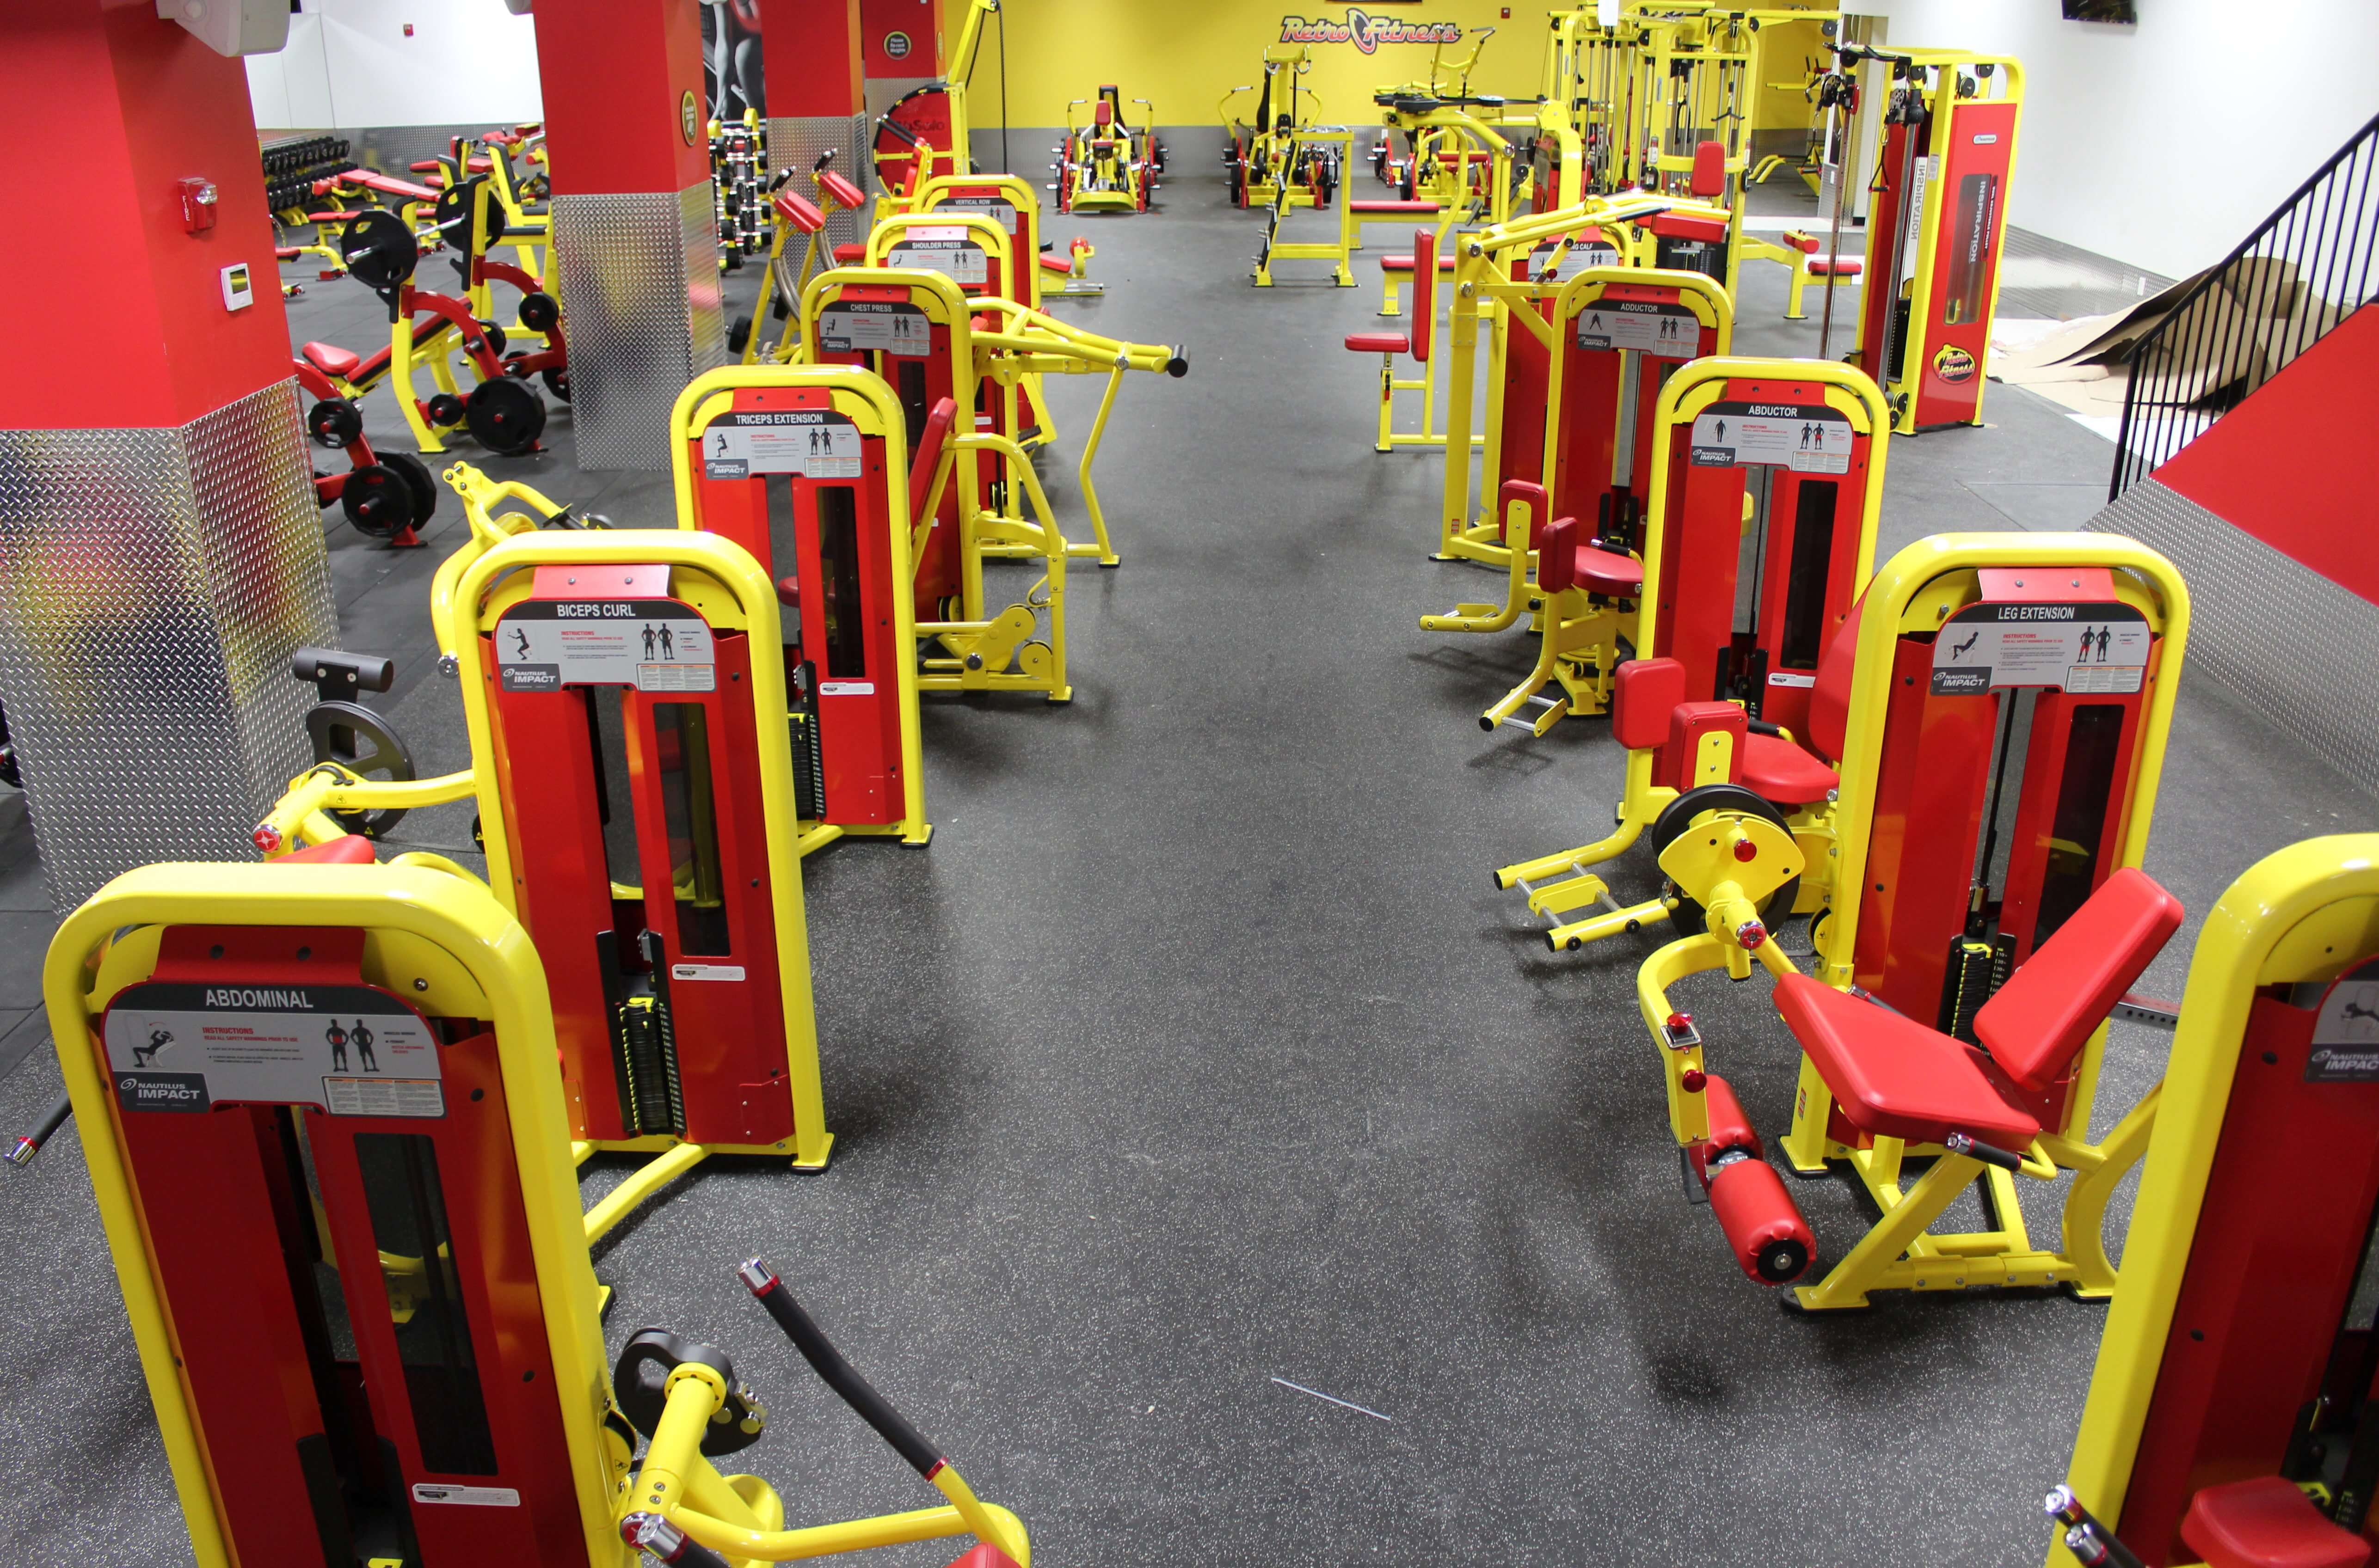 Retro Fitness To Open A New Location In Queens Village At The End Of